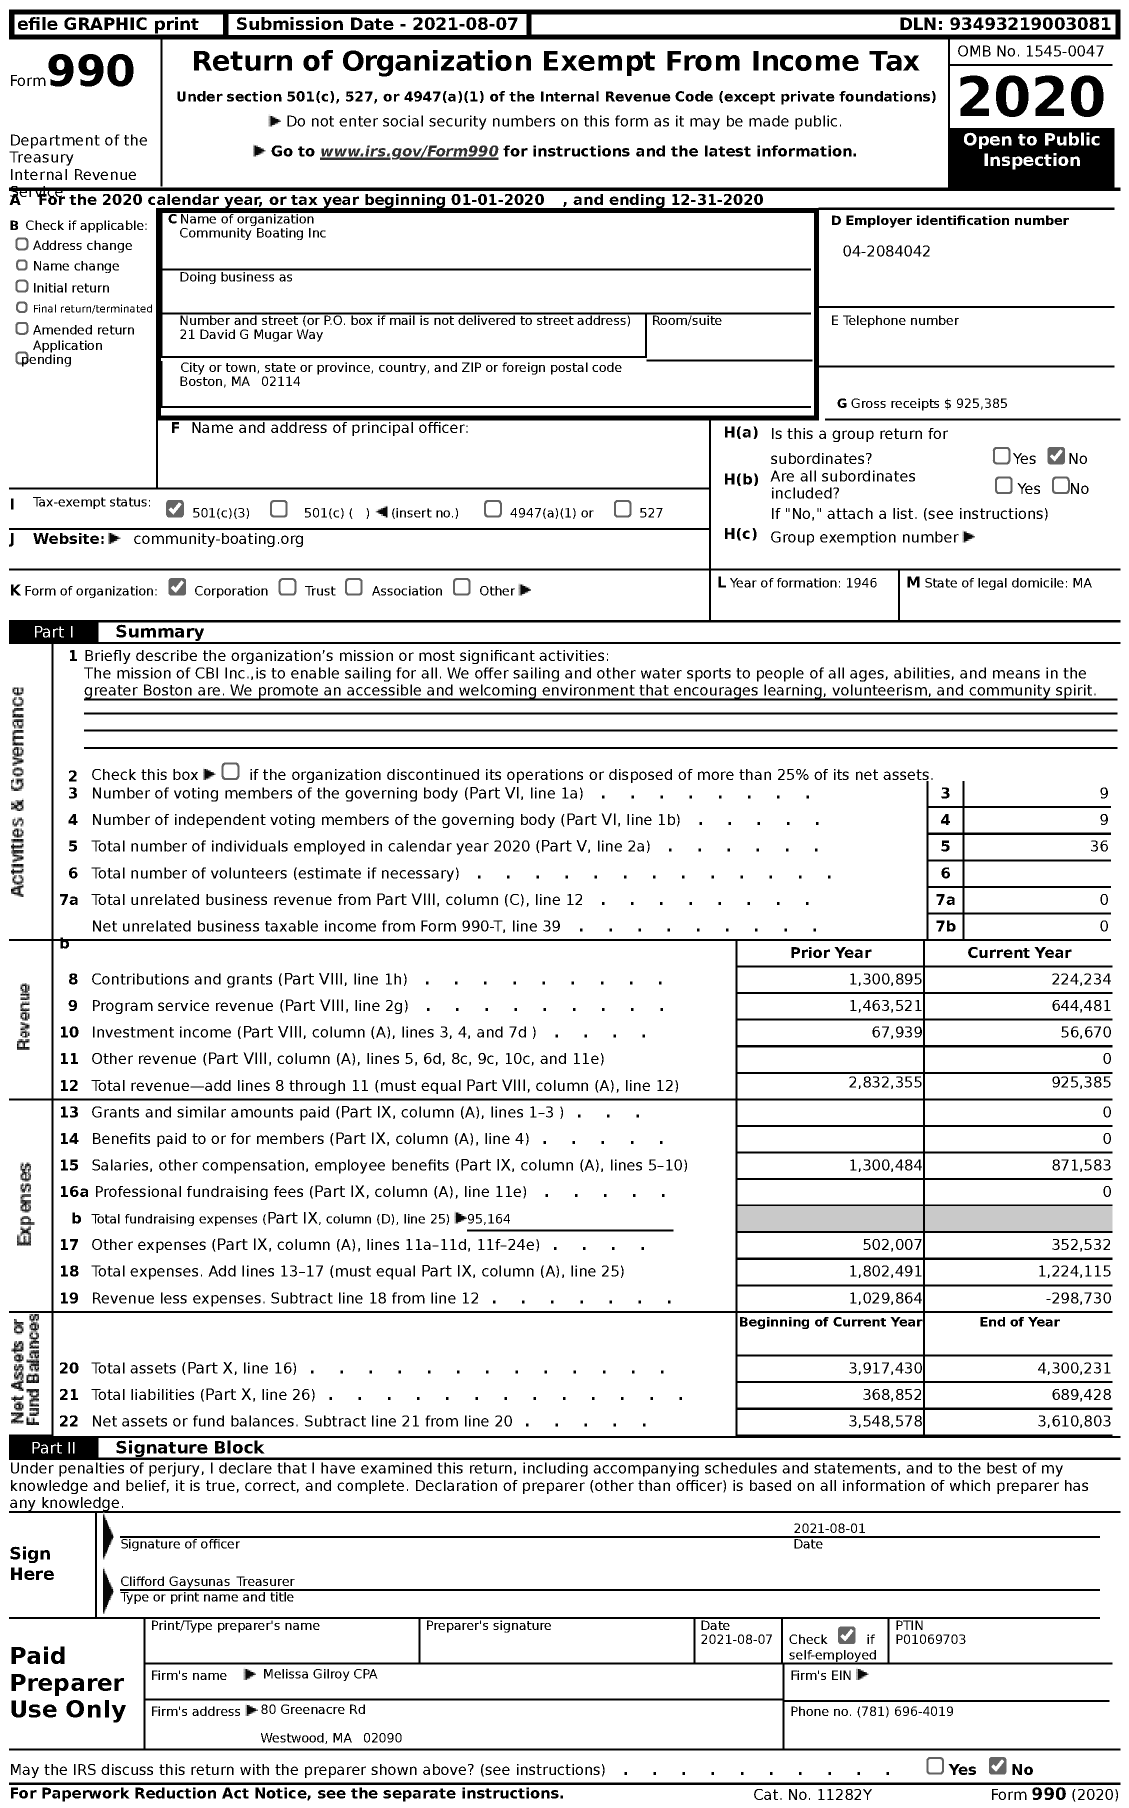 Image of first page of 2020 Form 990 for Community Boating (CB)